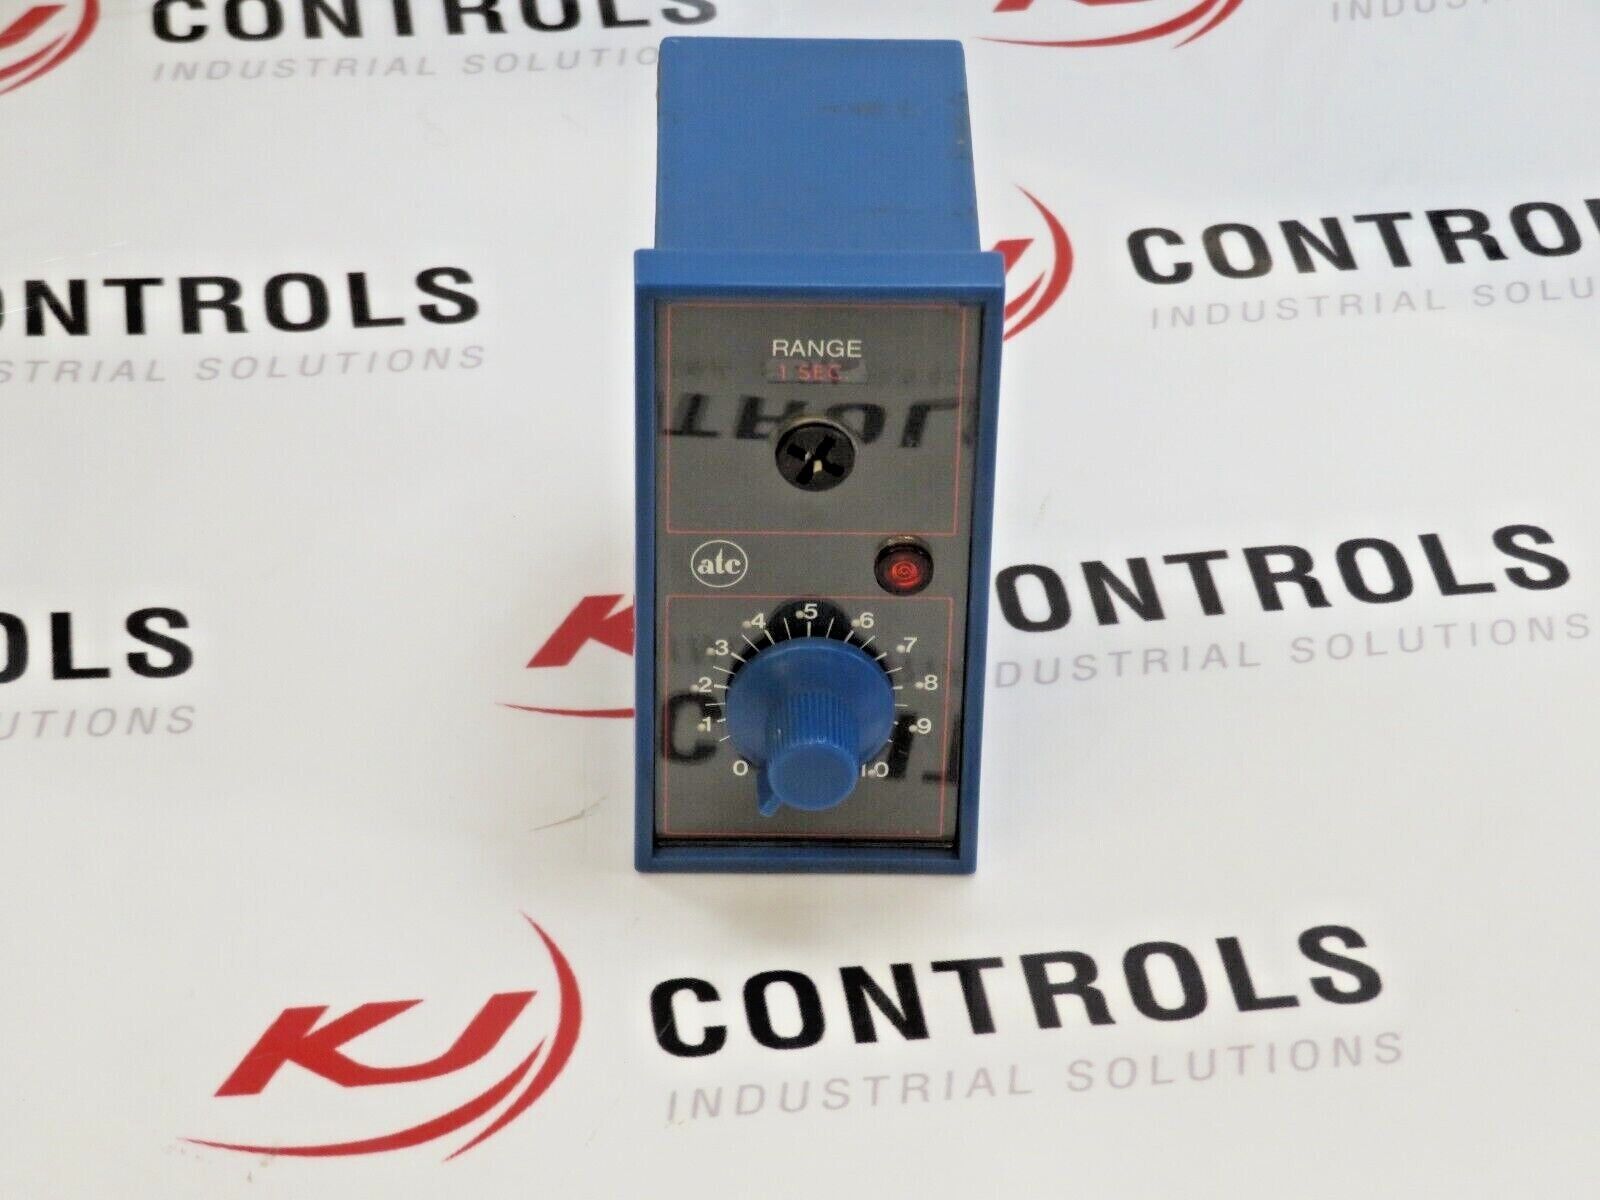 ATC 328H-200R-10XX Time Delay Relay 1s-10hr